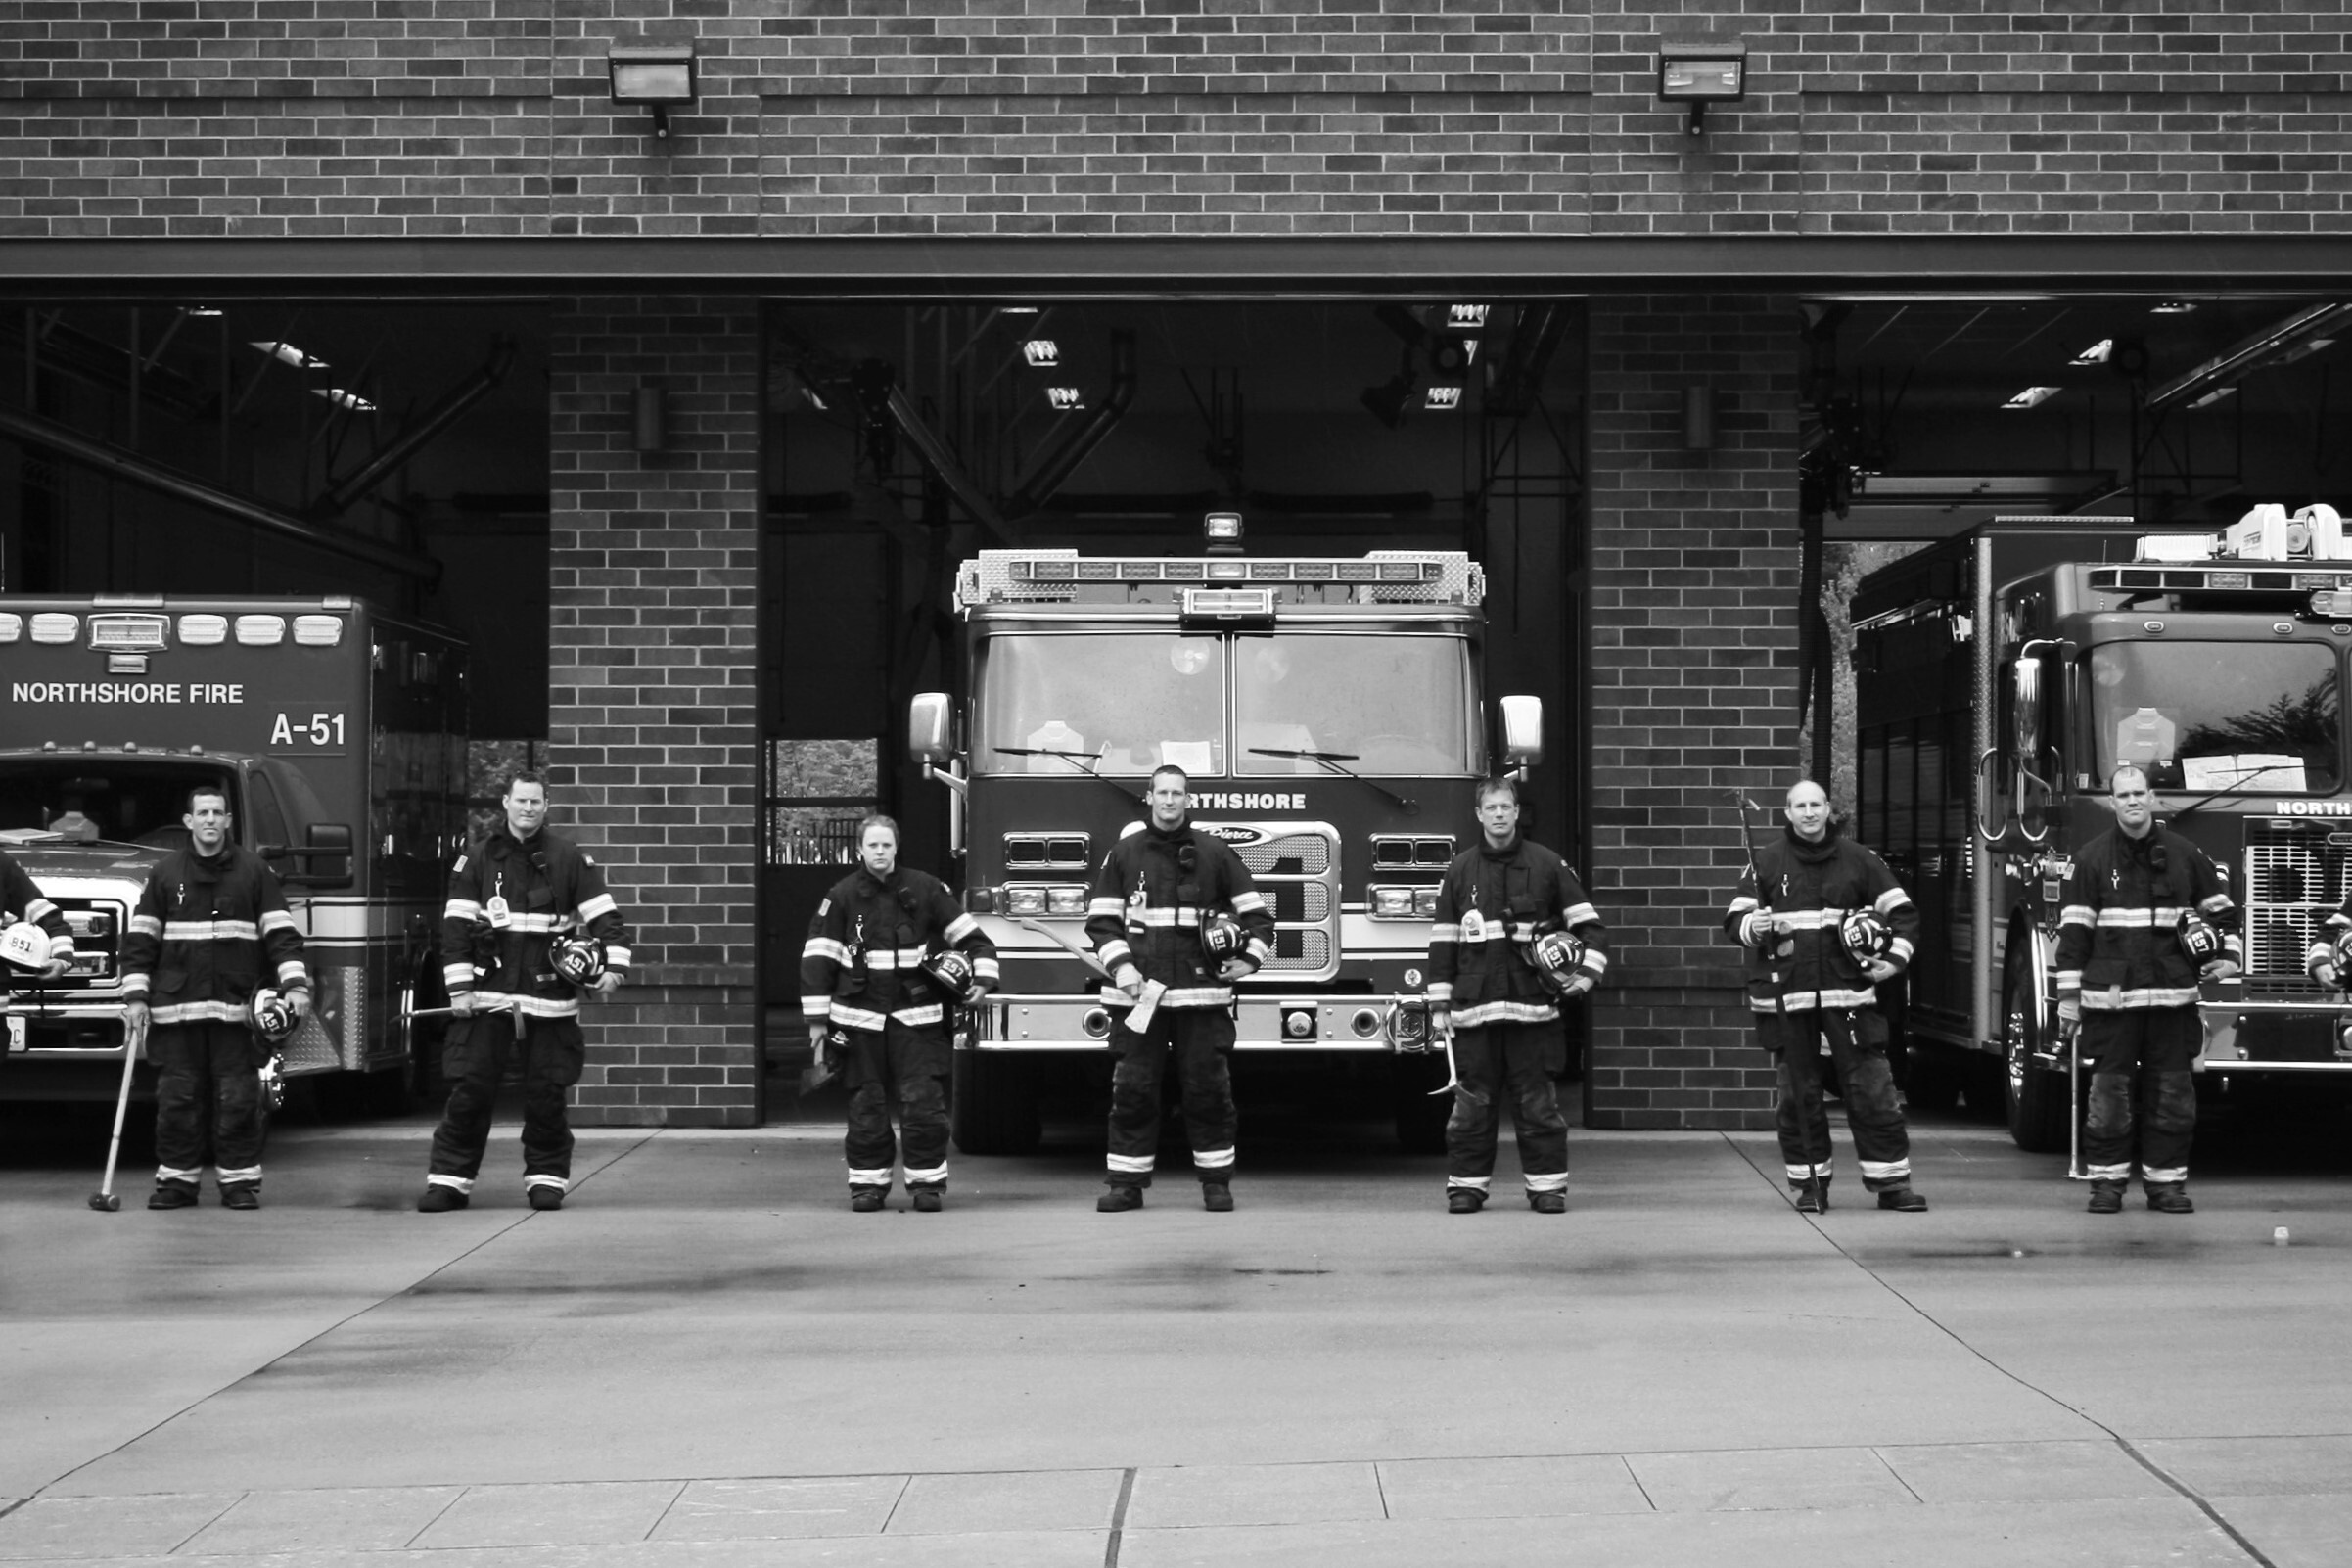 Fire fighters posing in front of engines